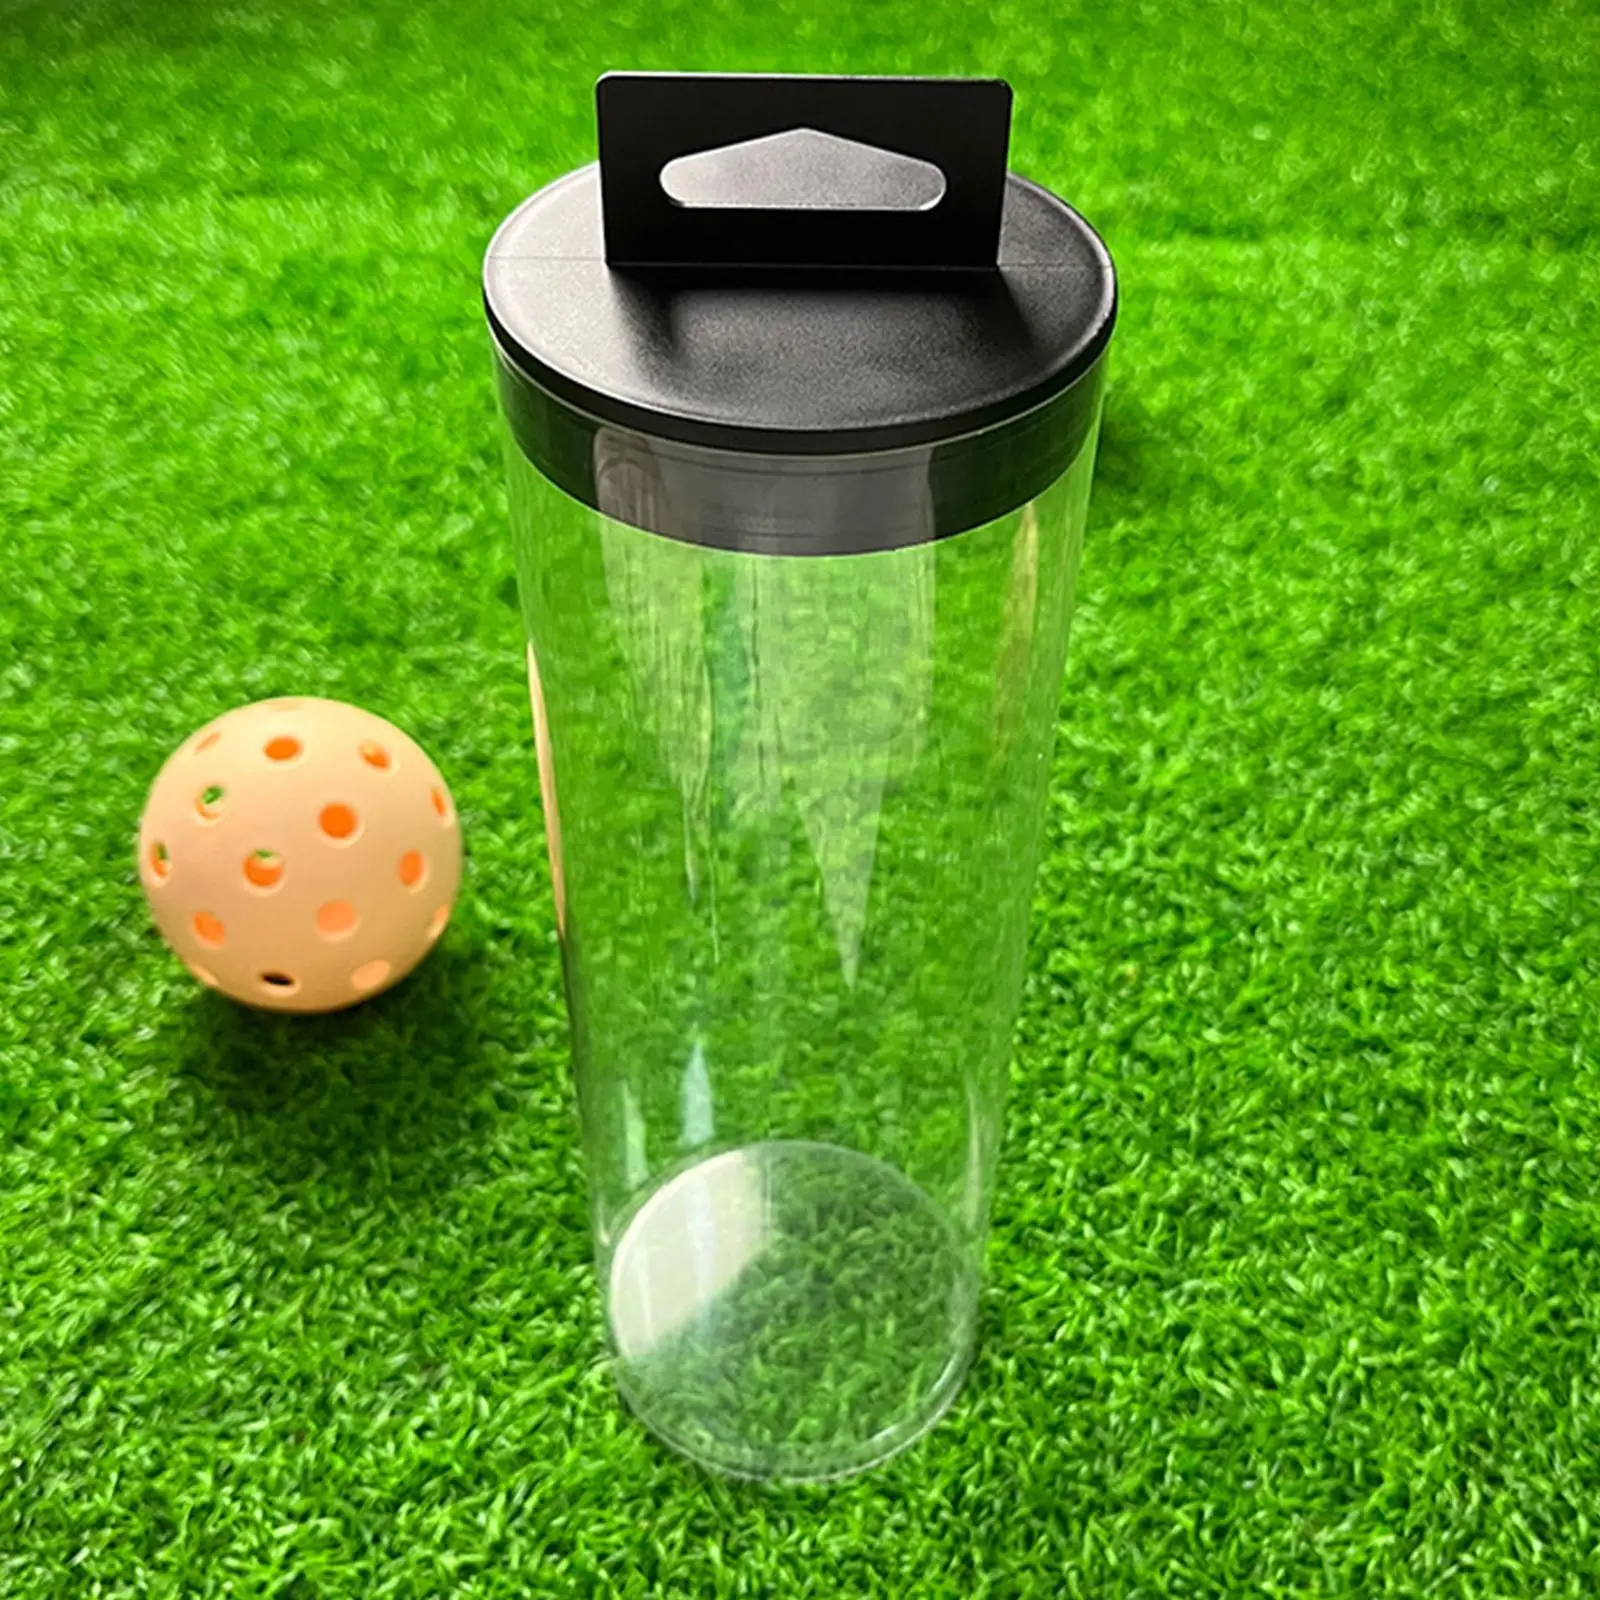 Tennis Ball Can Transparent Travel Carrier Gadgets Portable Pickleball Canister for Golf Training Practice Accessories